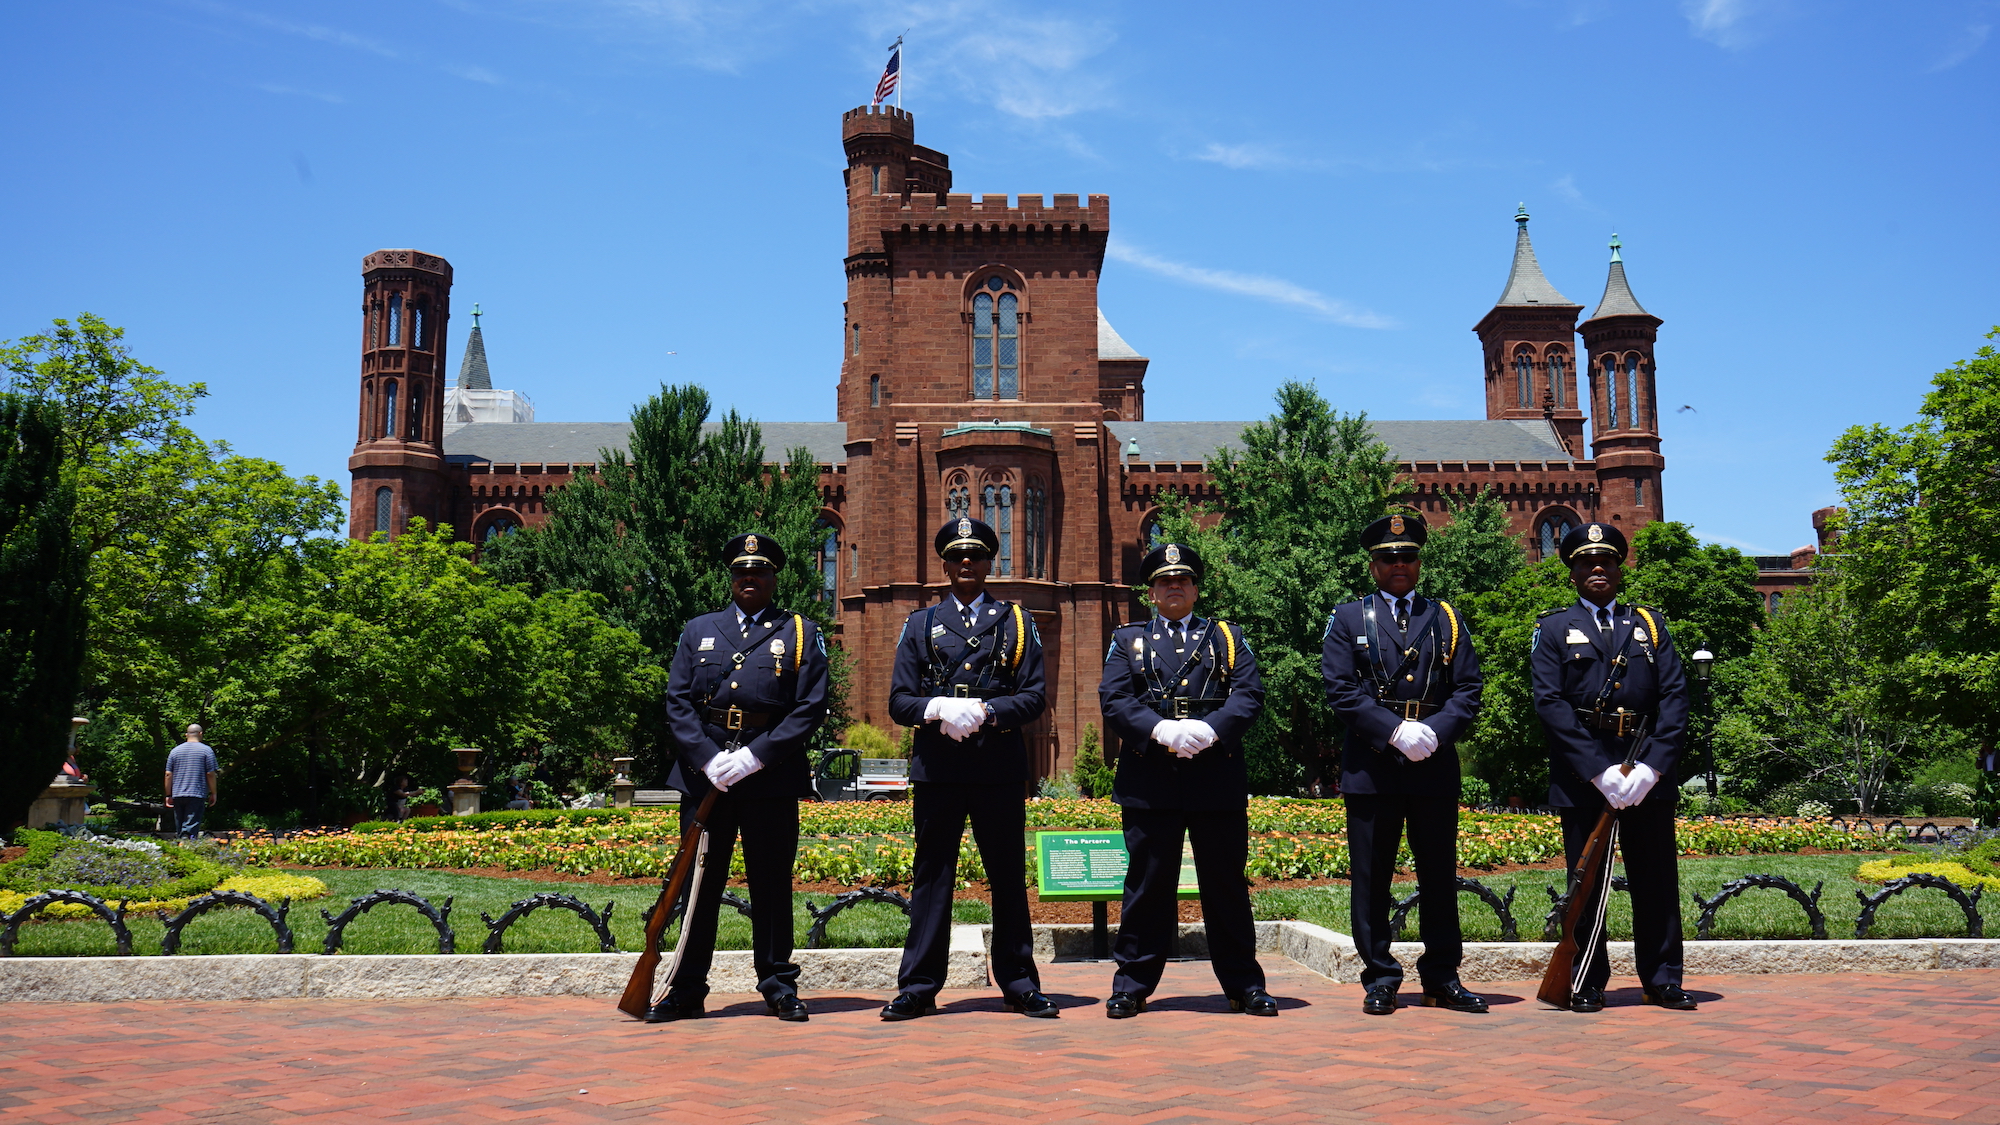 Smithsonian Honor Guard standing in front of the Smithsonian Castle